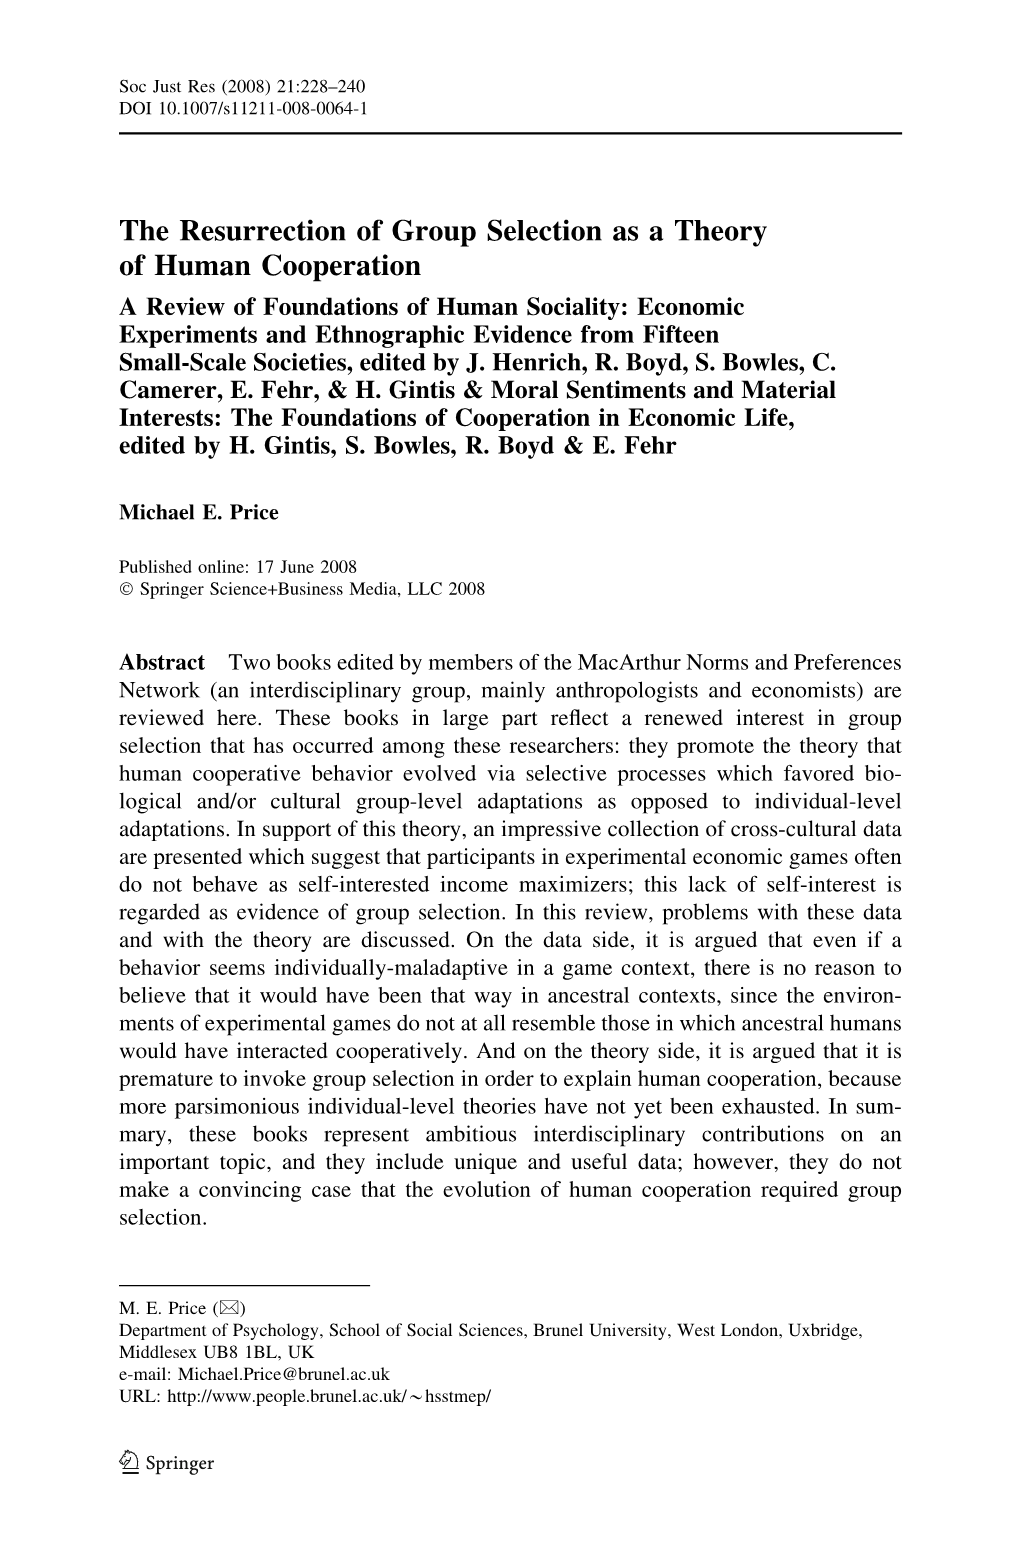 The Resurrection of Group Selection As a Theory of Human Cooperation